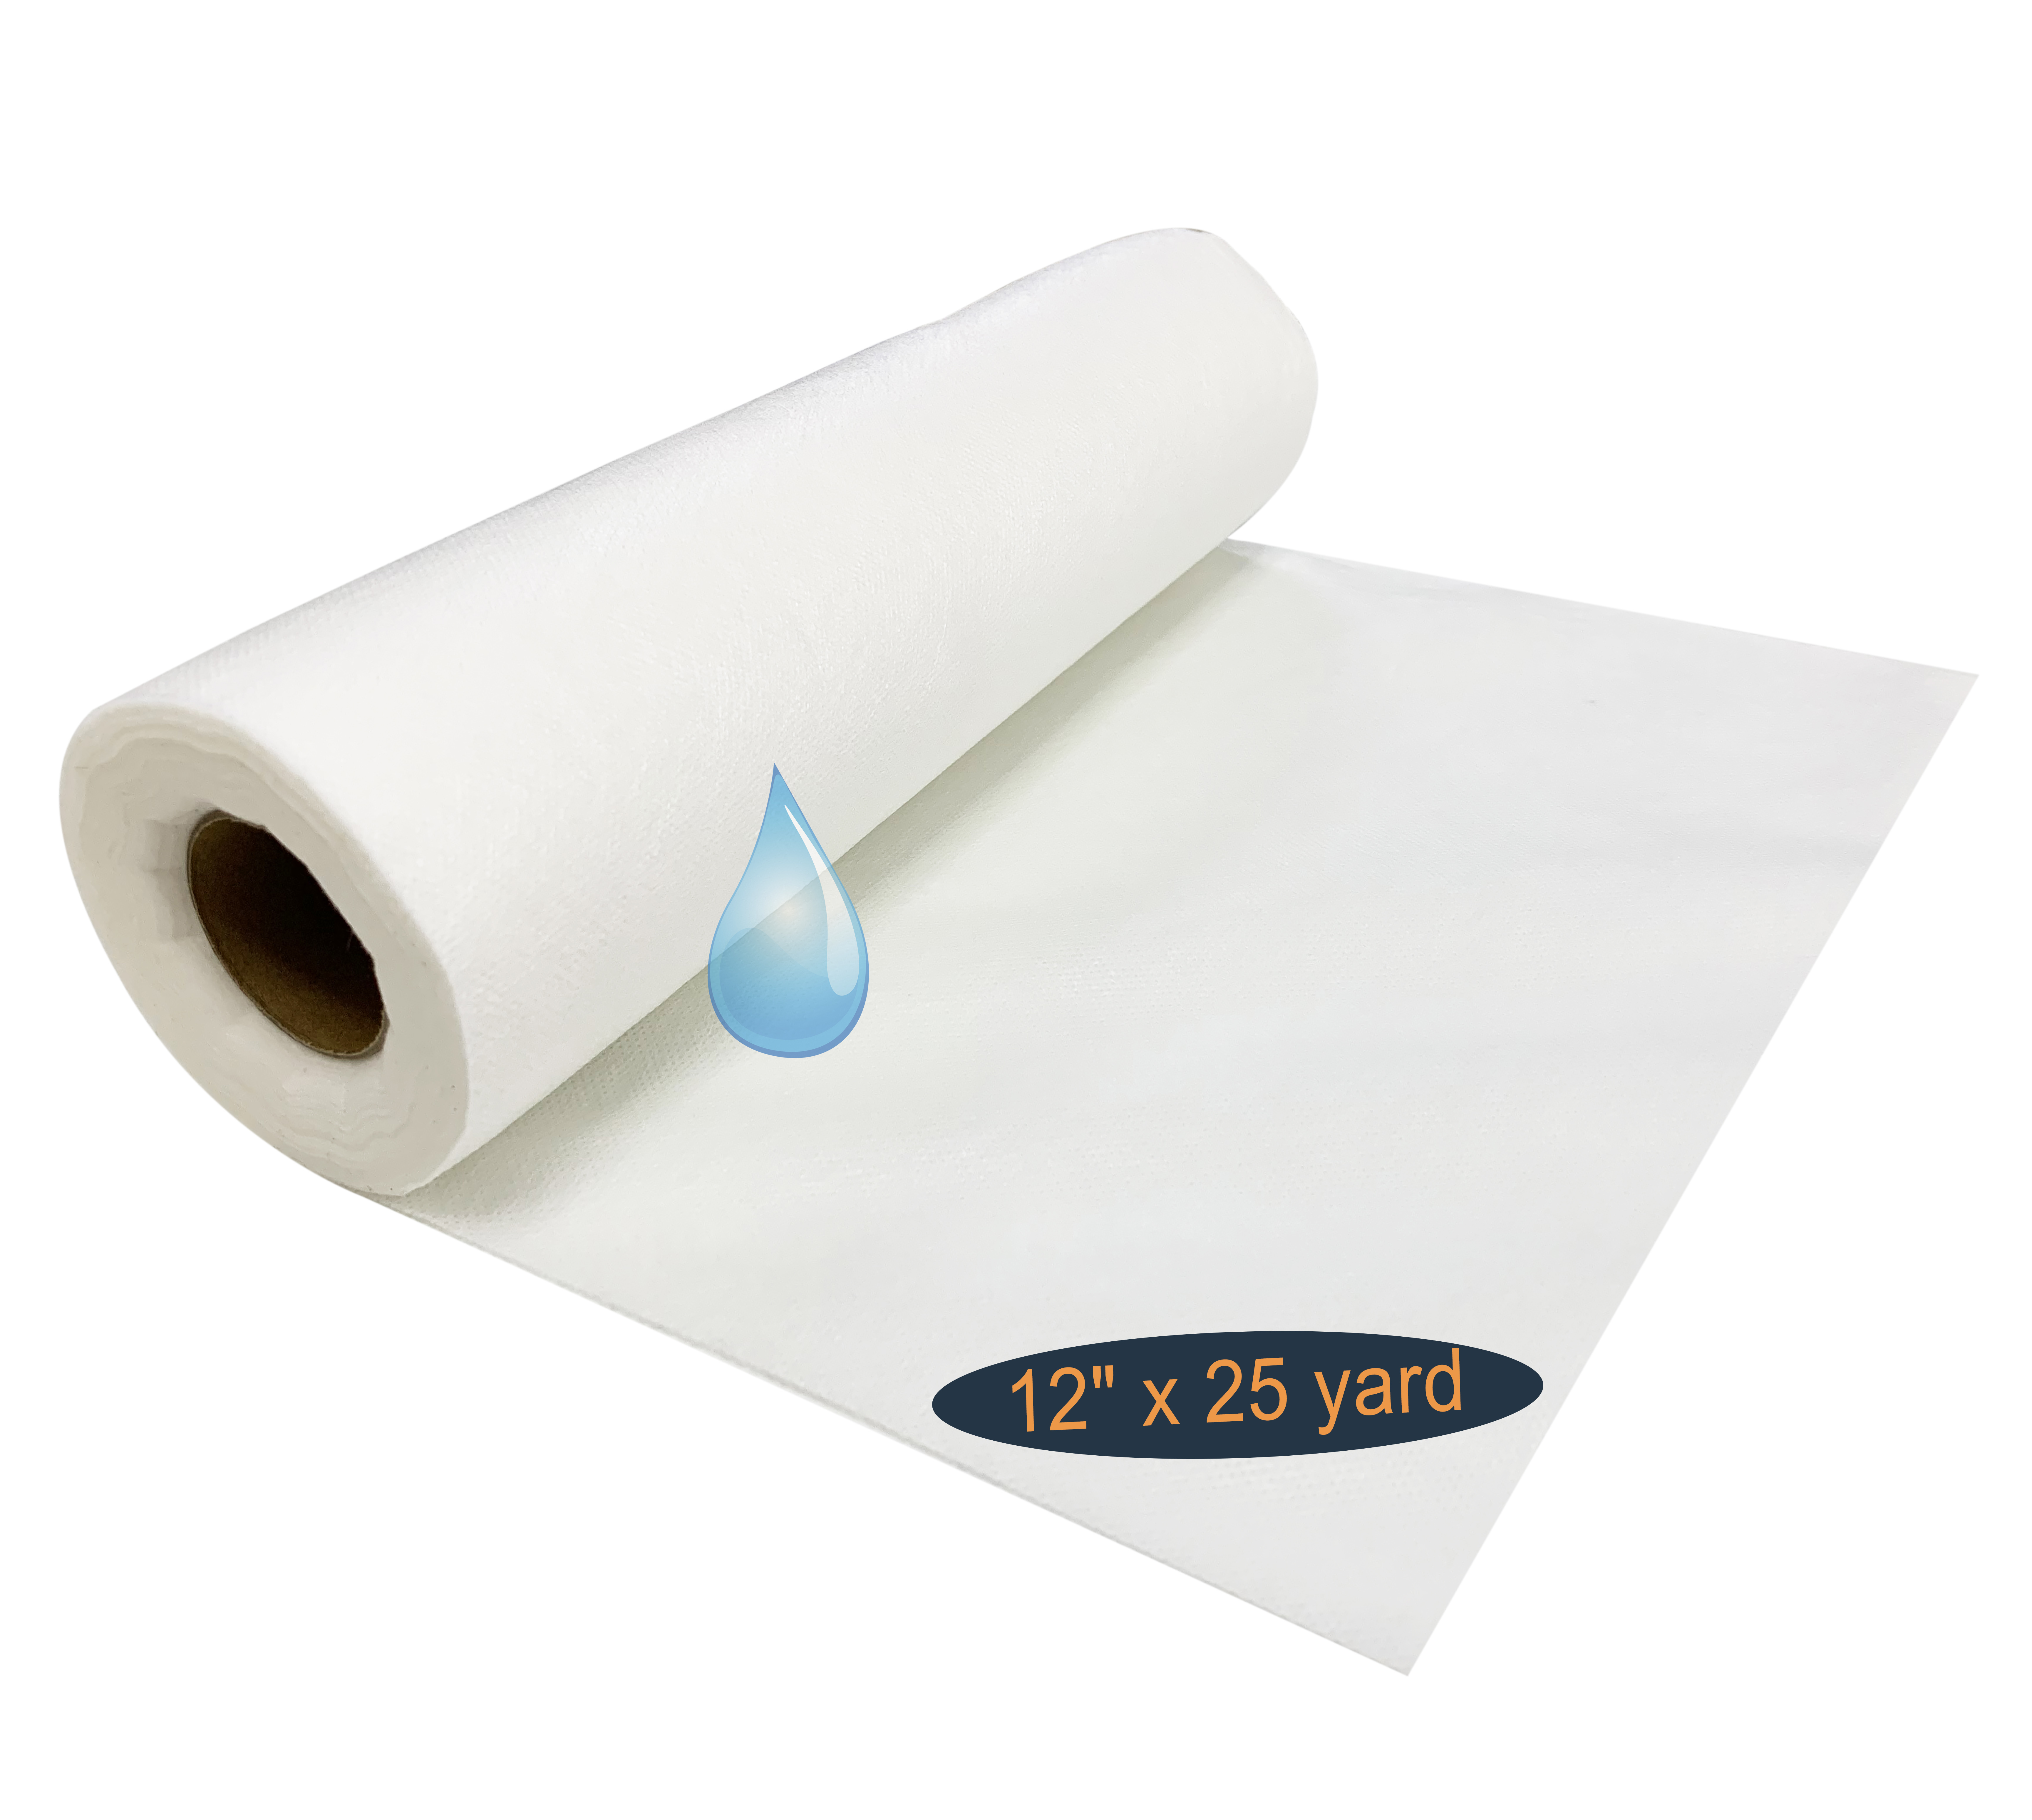 HimaPro Wash Away Non-Woven Stabilizer Backing for Machine Embroidery and Hand Sewing Water Soluble Embroidery Stabilizer (12 inch x 25 Yard)